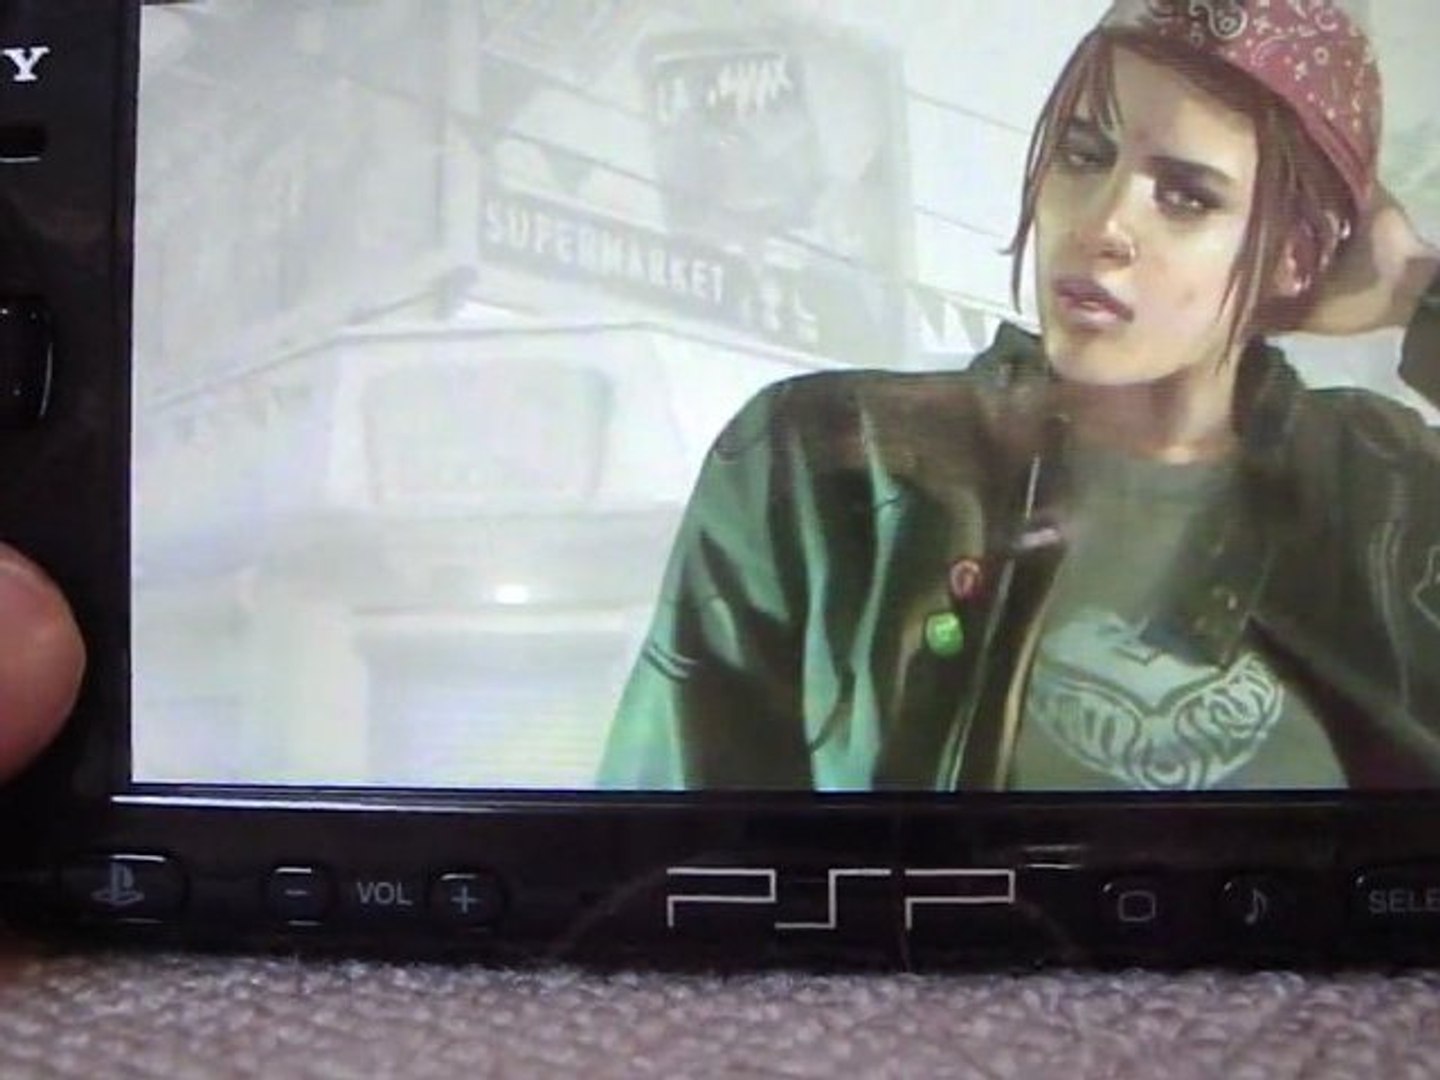 GTA THE LOST AND DAMNED PSP - video Dailymotion